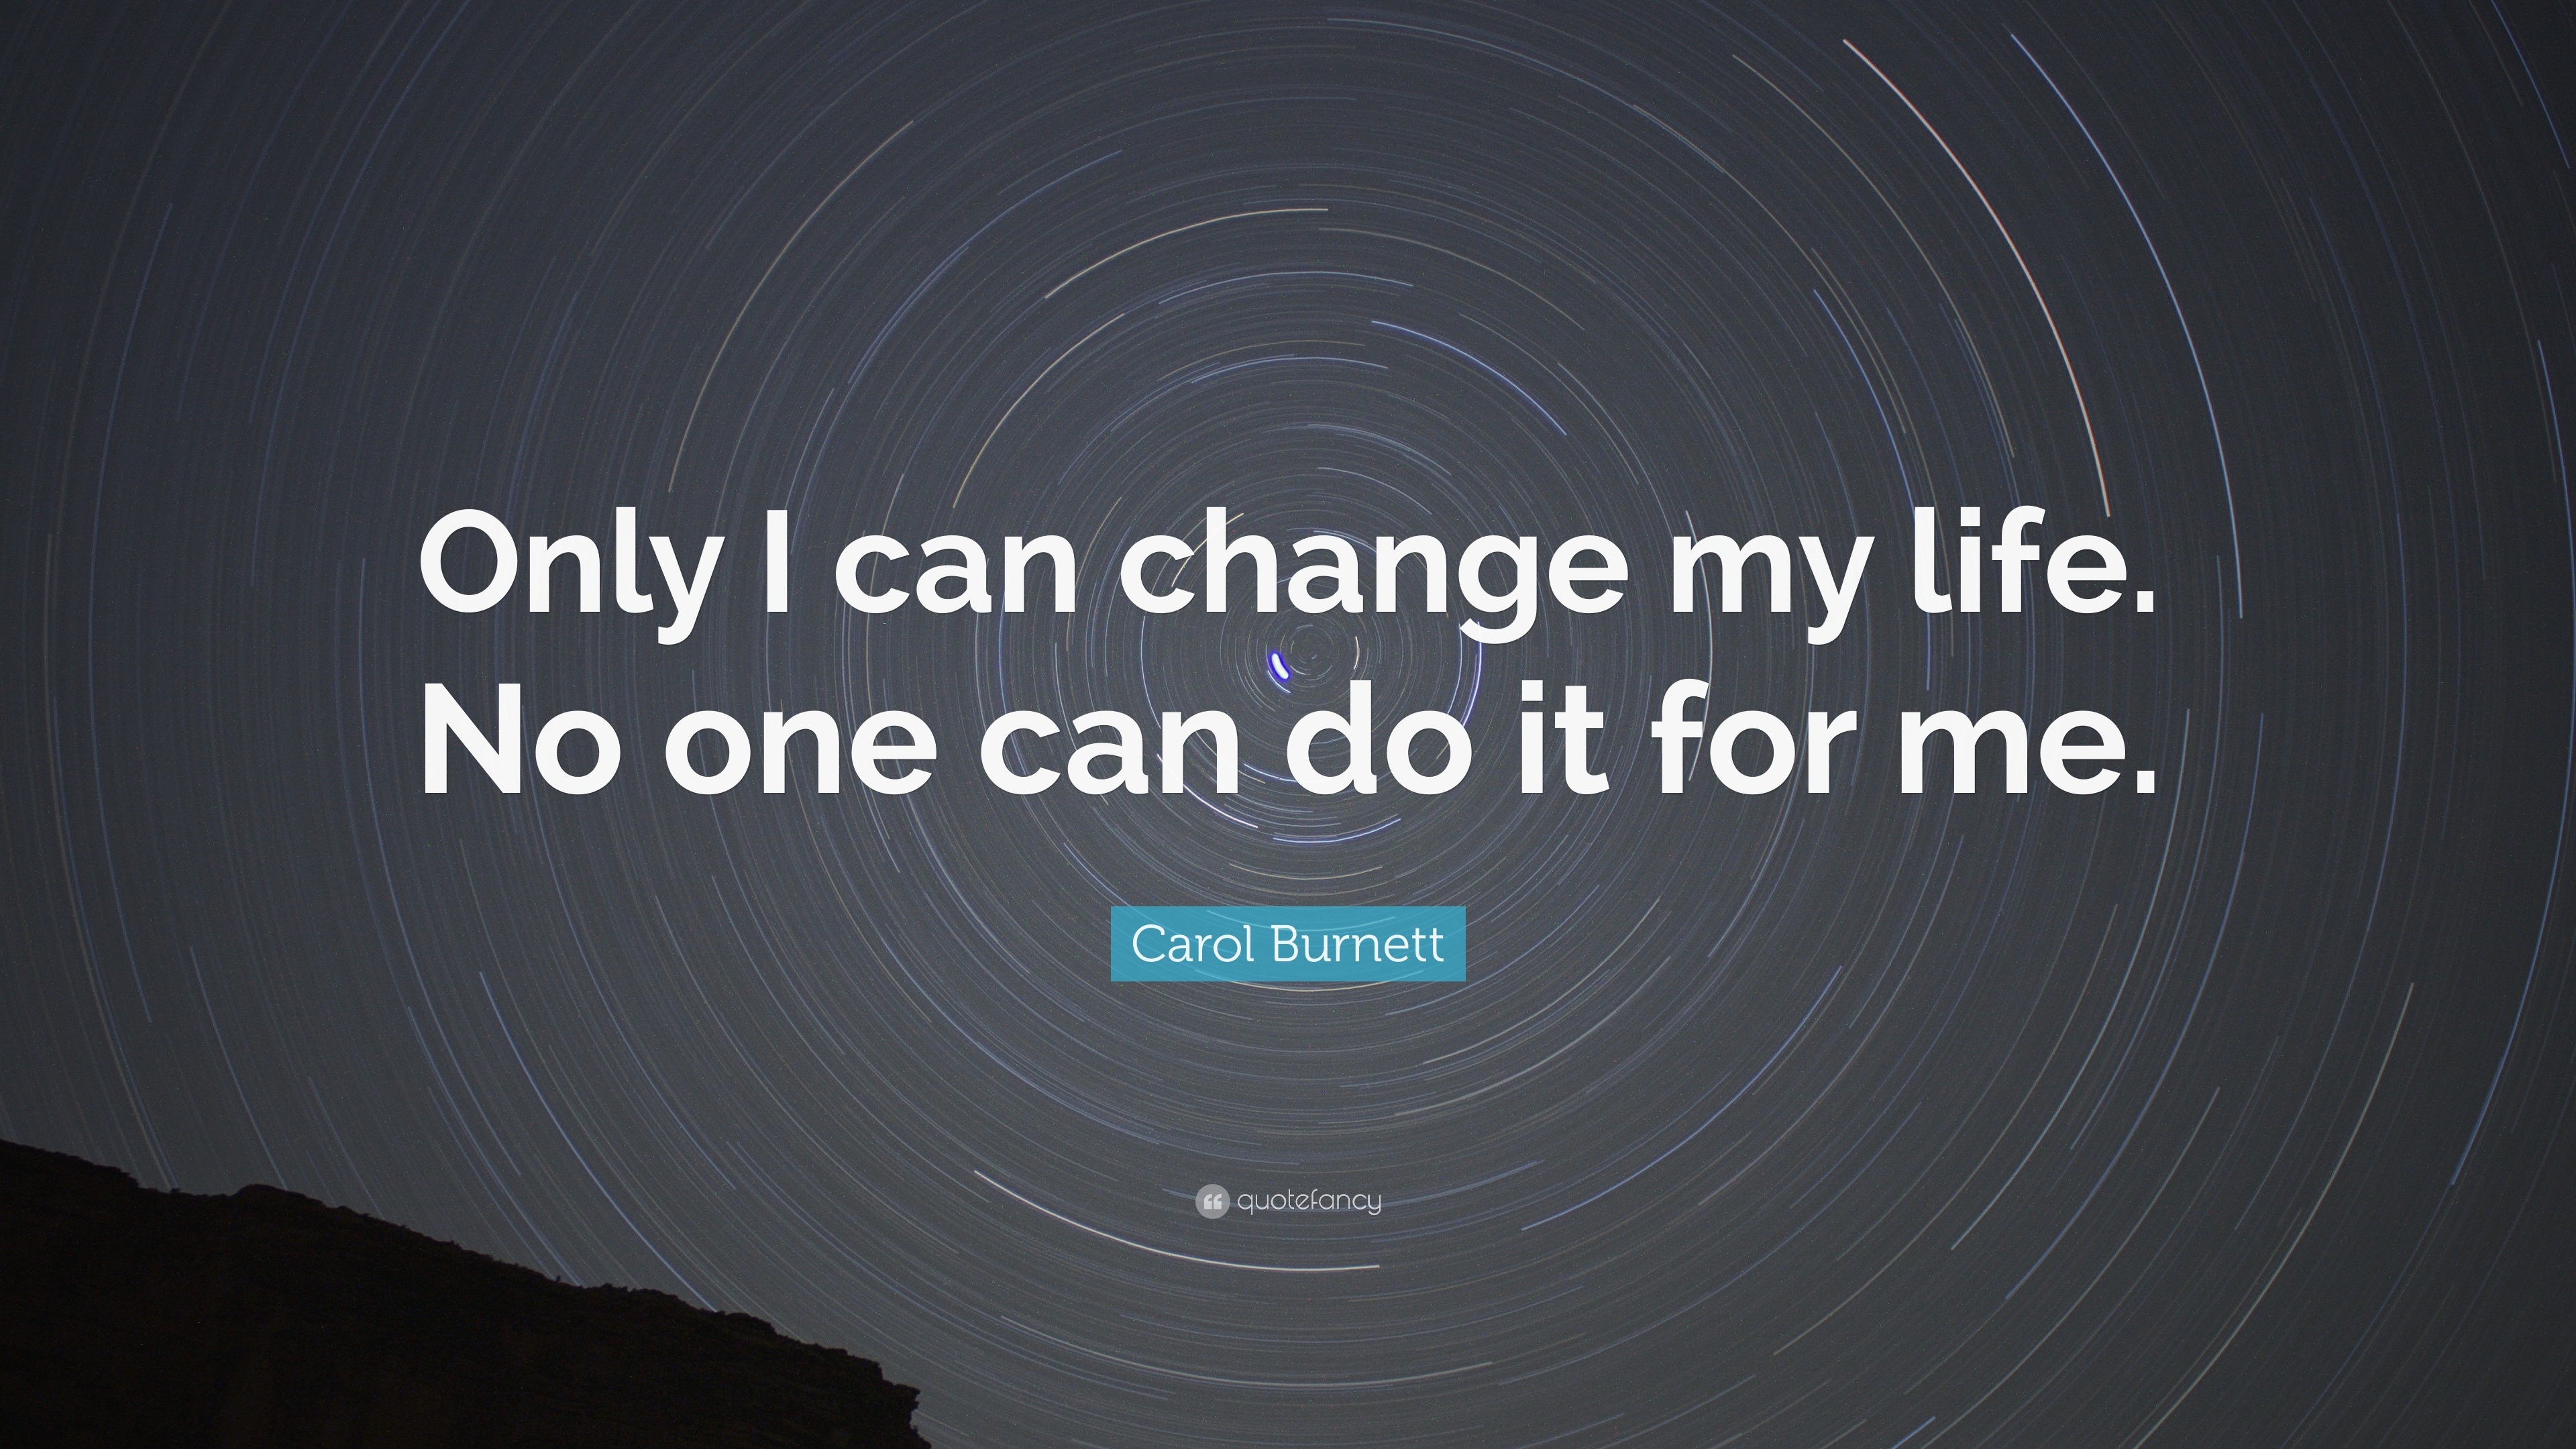 Carol Burnett Quote “only I Can Change My Life No One Can Do It For Me”